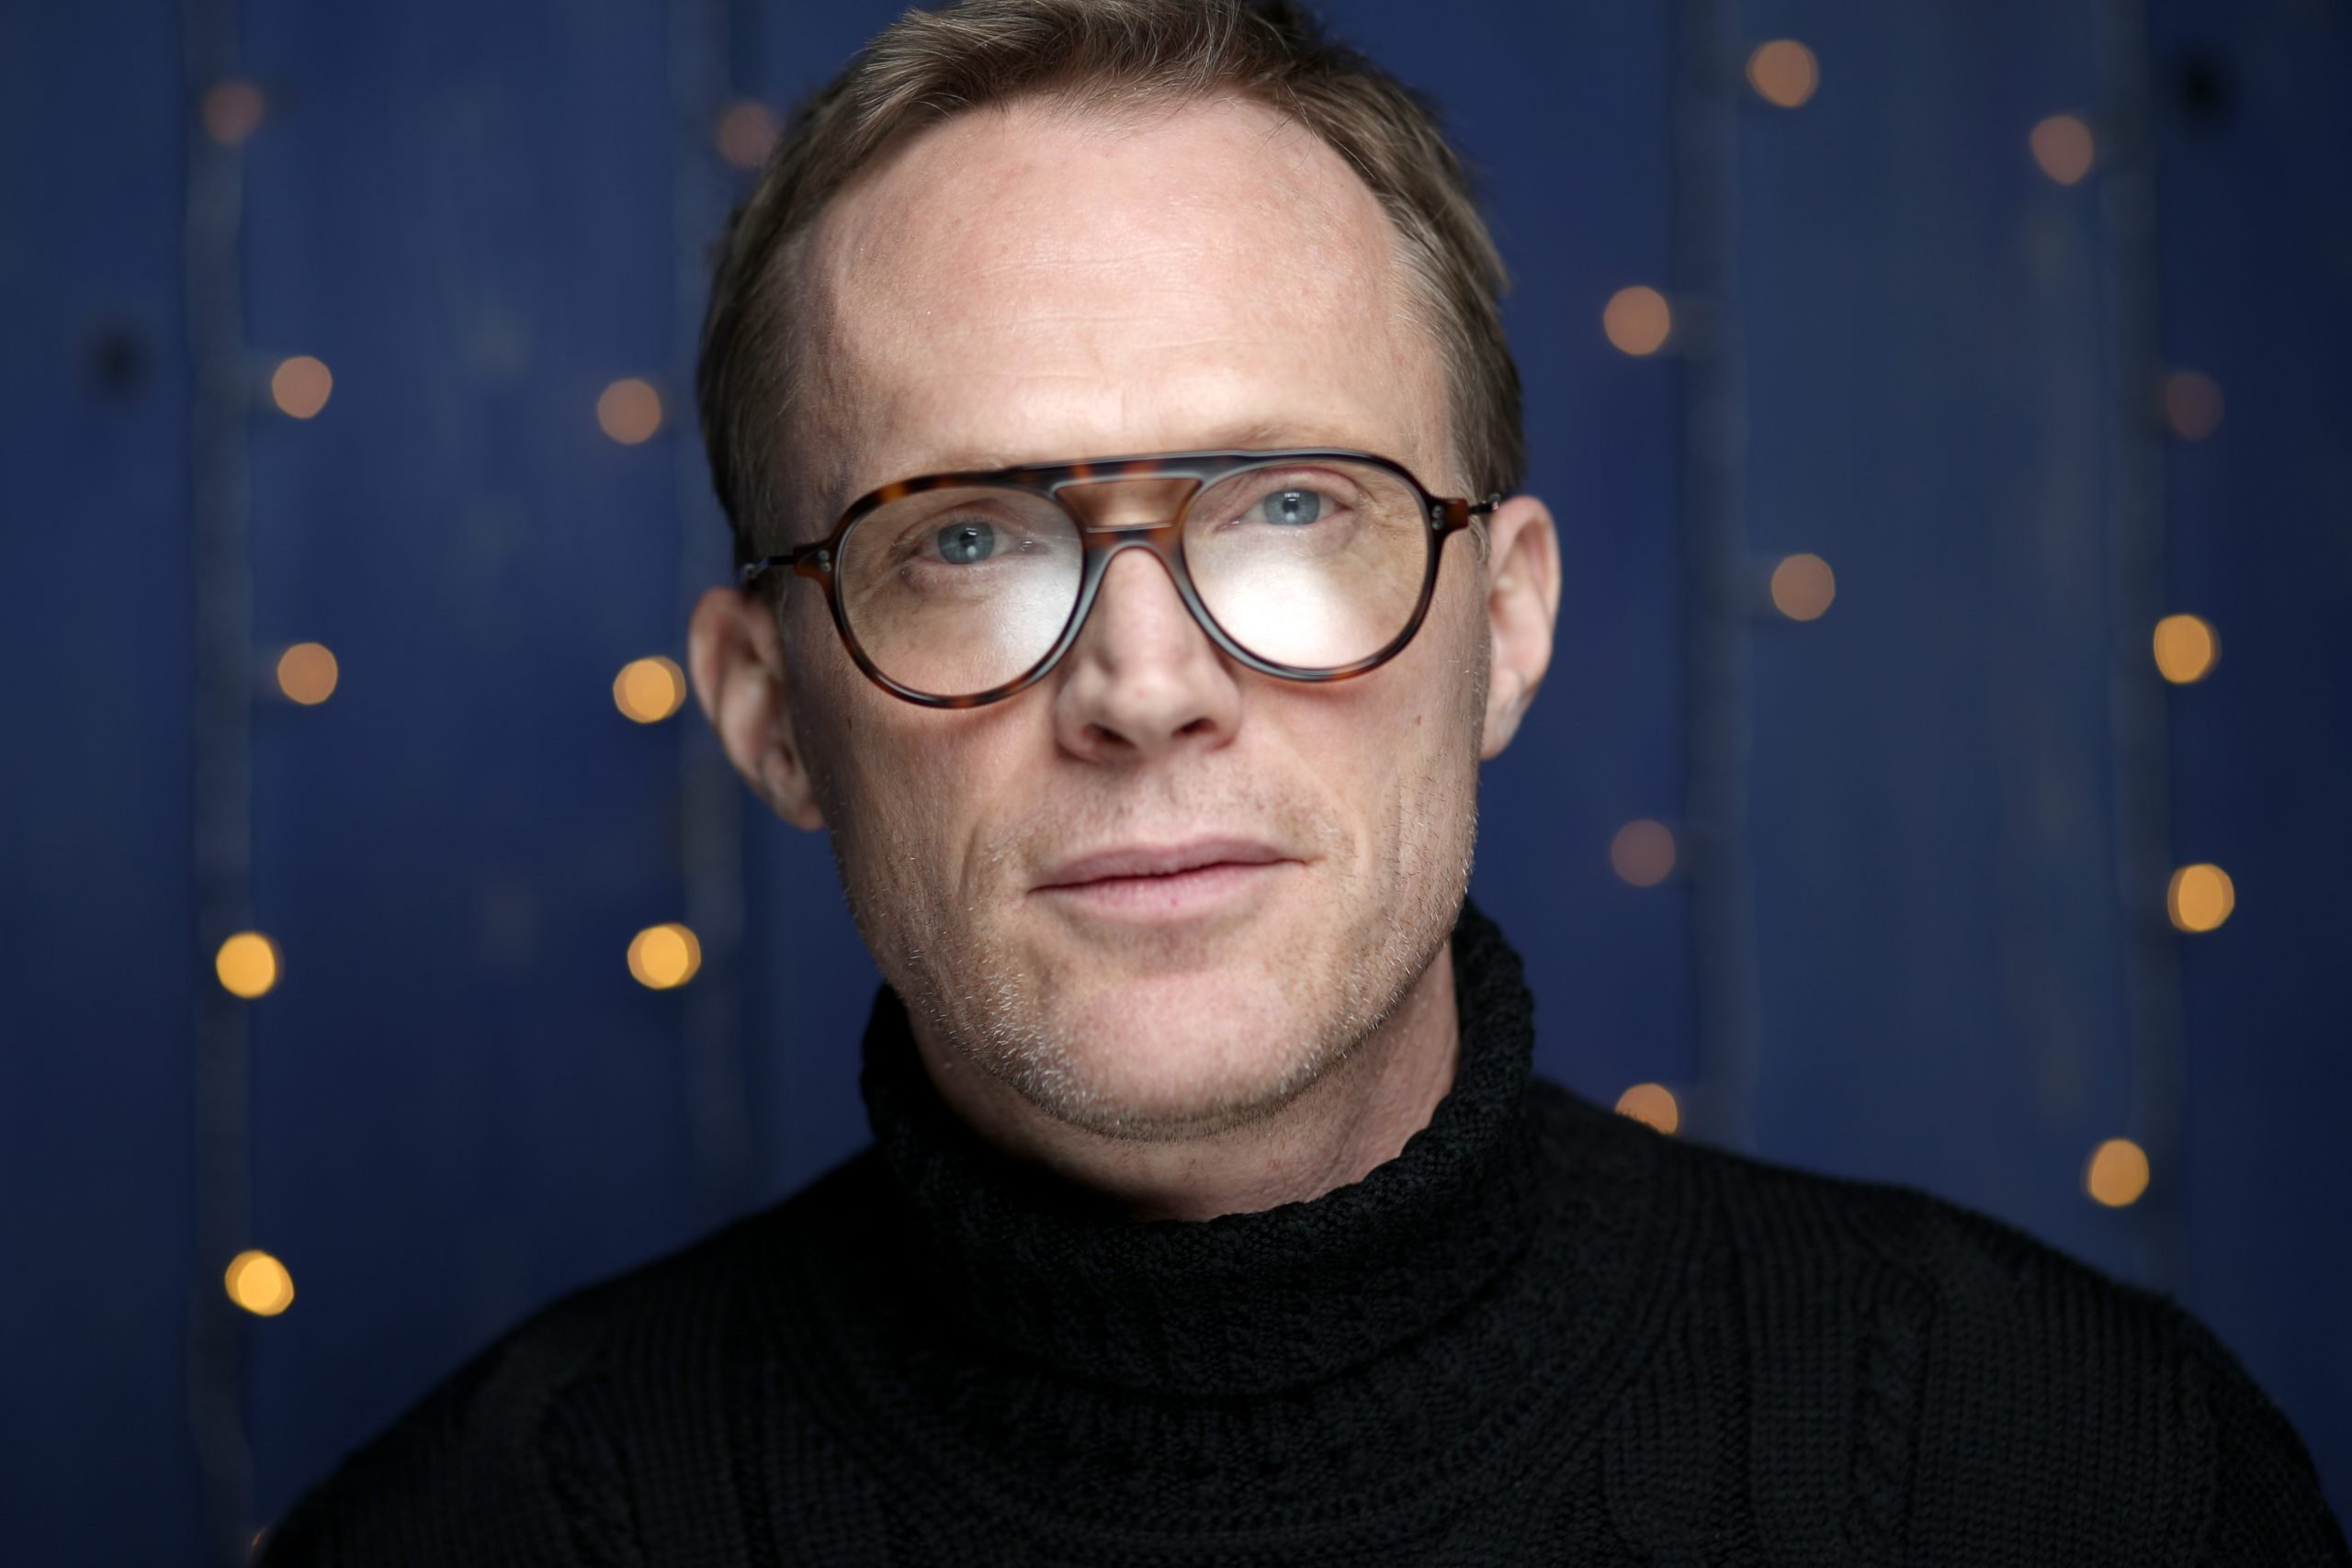 Paul Bettany’s Net Worth in 2021 and His Most Successful Films